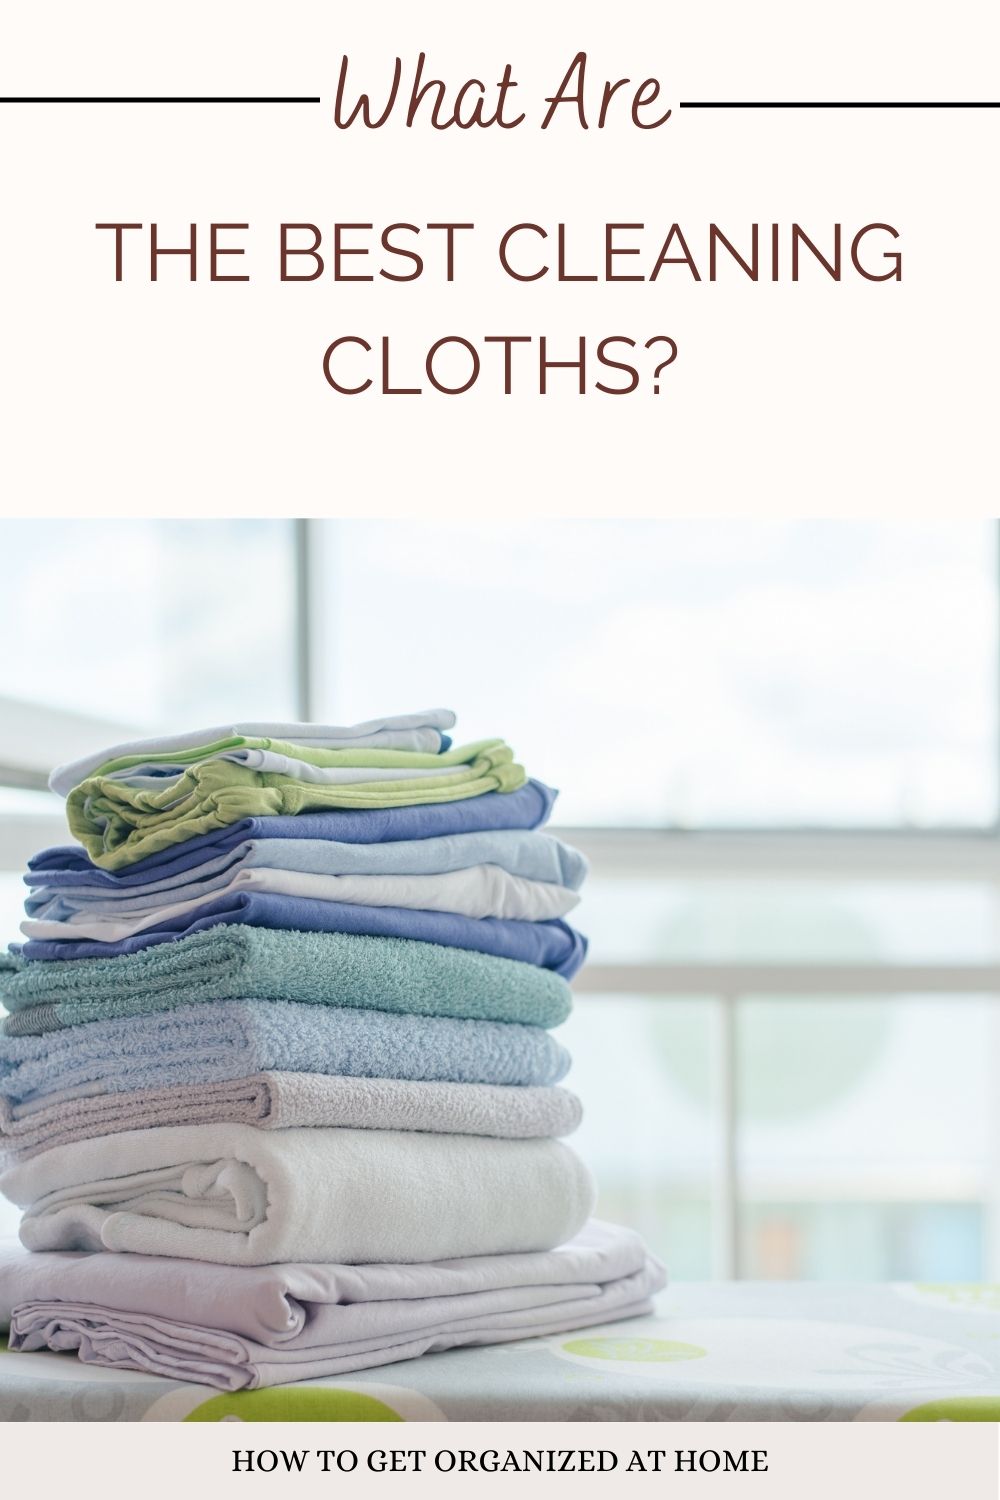 From tatty to tidy: which worn-out clothes make the best cleaning rags?, Fashion